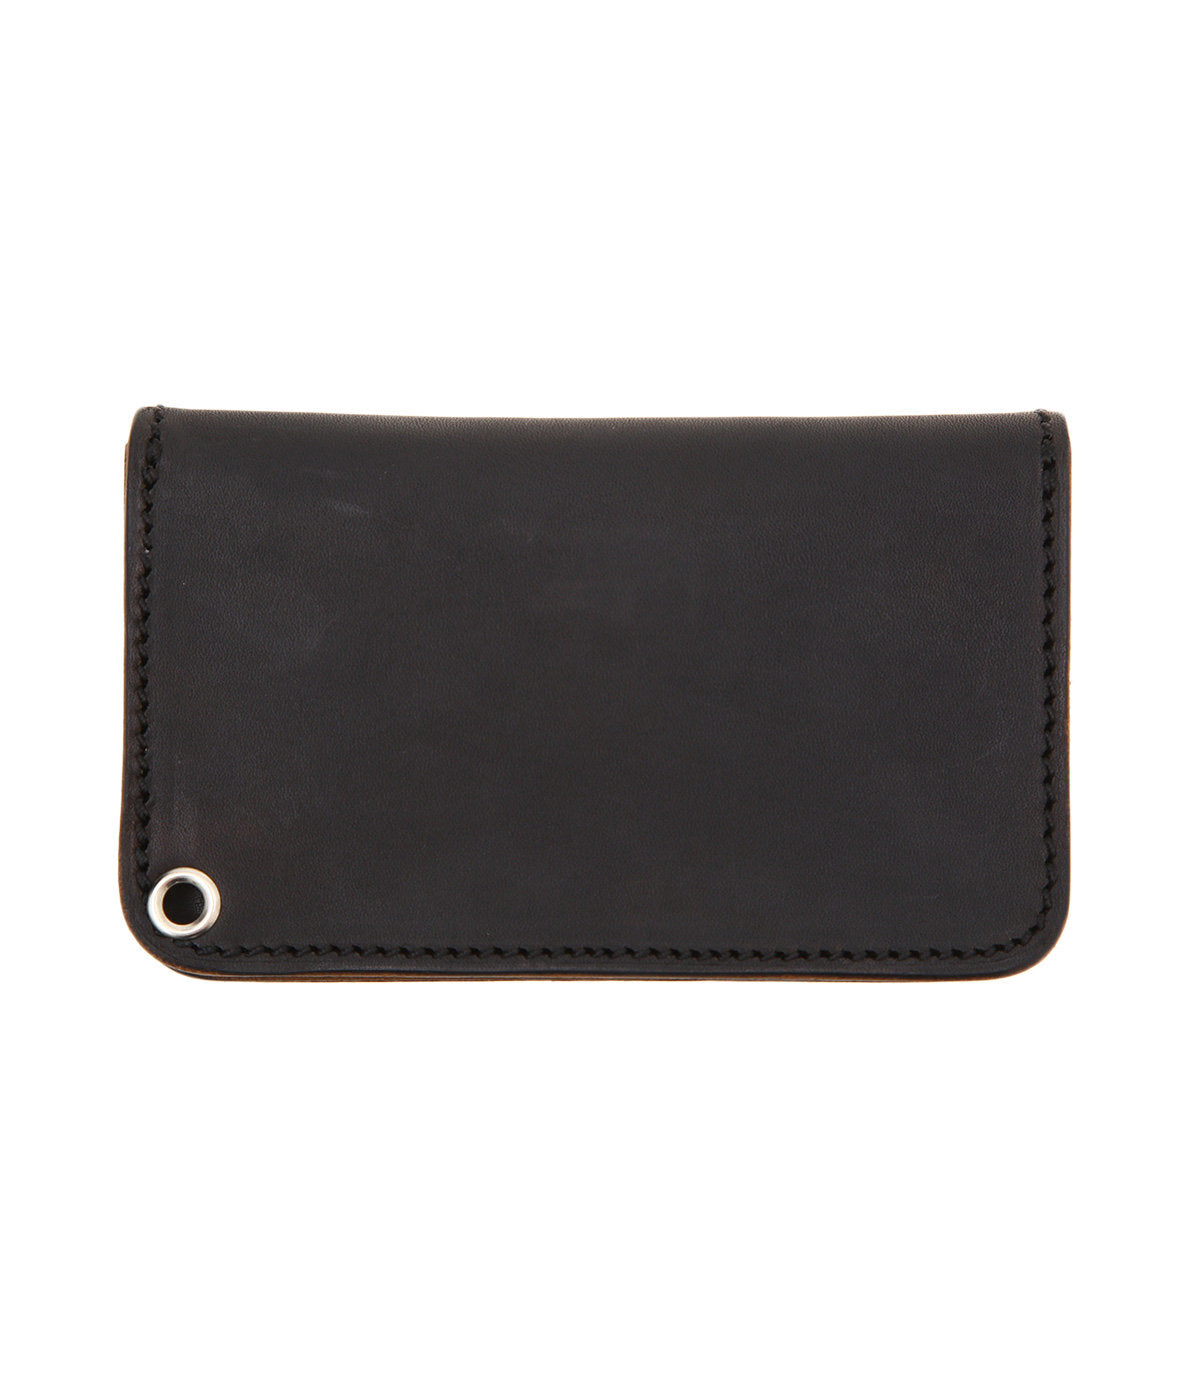 LARRY SMITH TRUCKERS WALLET No. 2 (TUQ SHELL) -S-